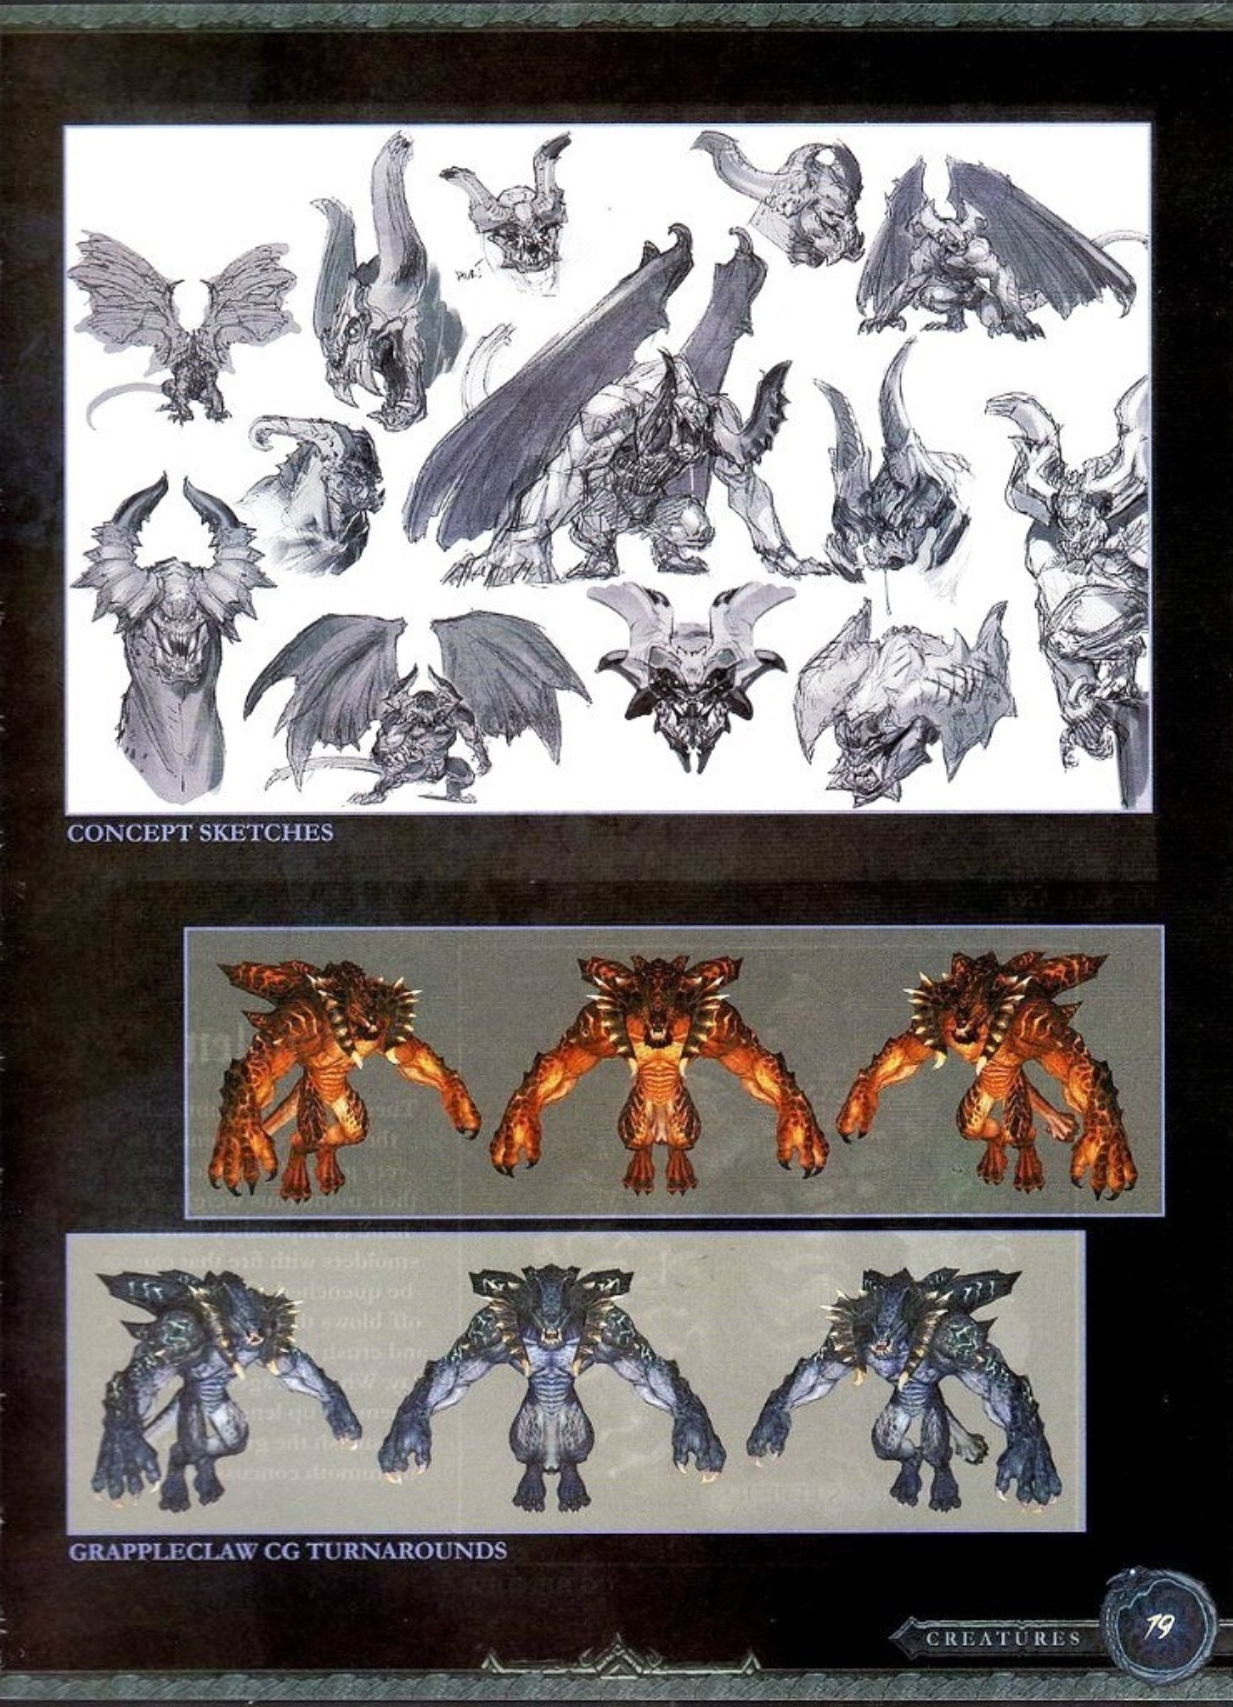 The Art of Darksiders (low-res, missing pages, and watermarked) 78